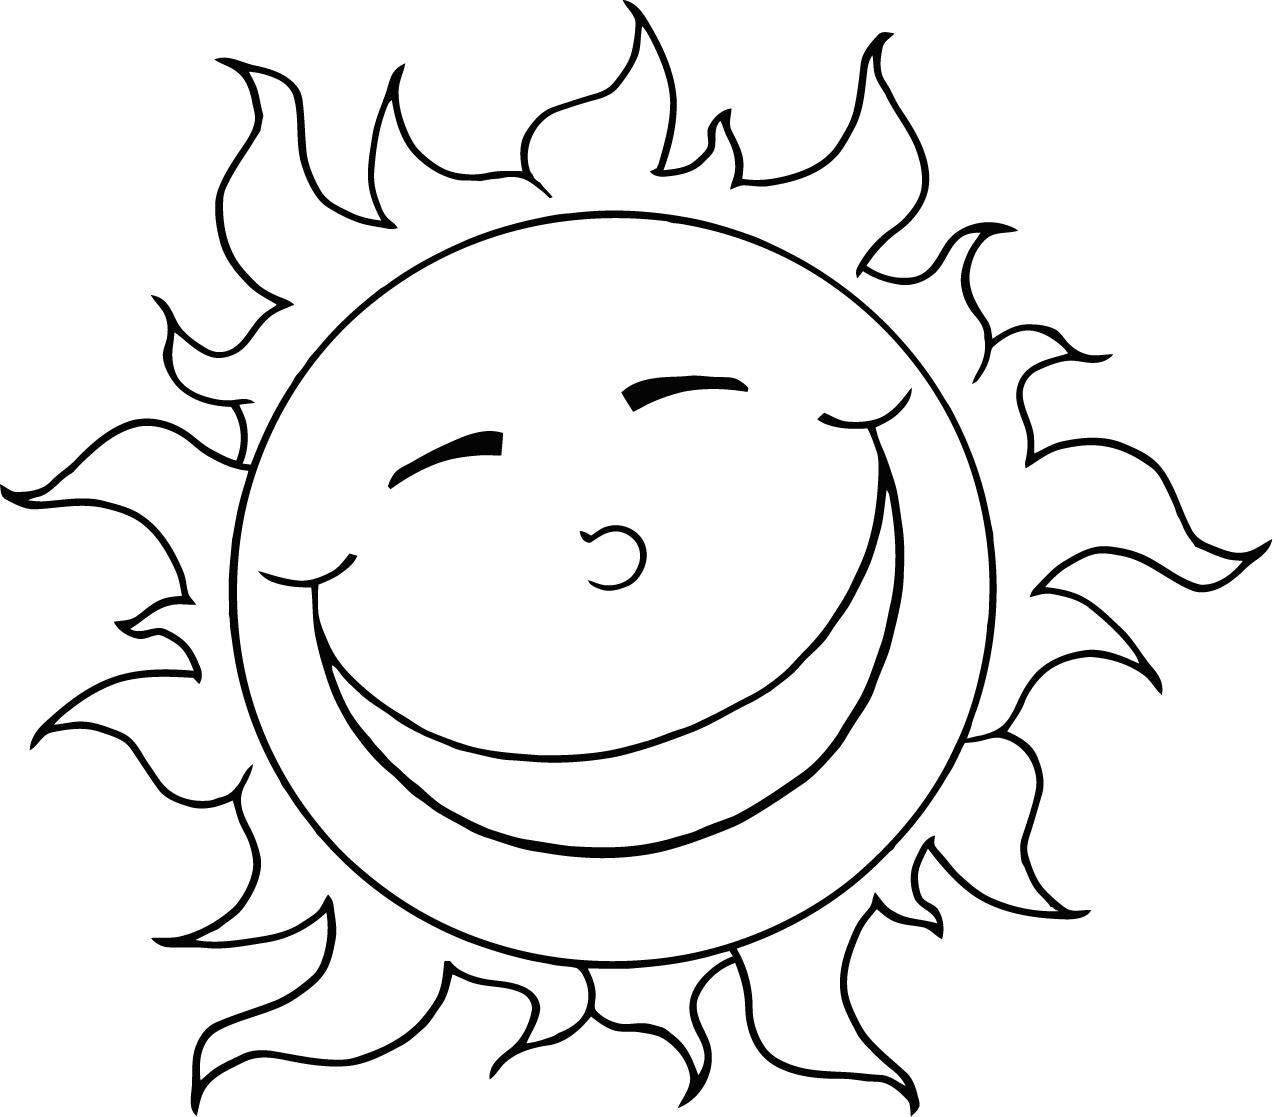 printable-sun-coloring-pages-printable-word-searches